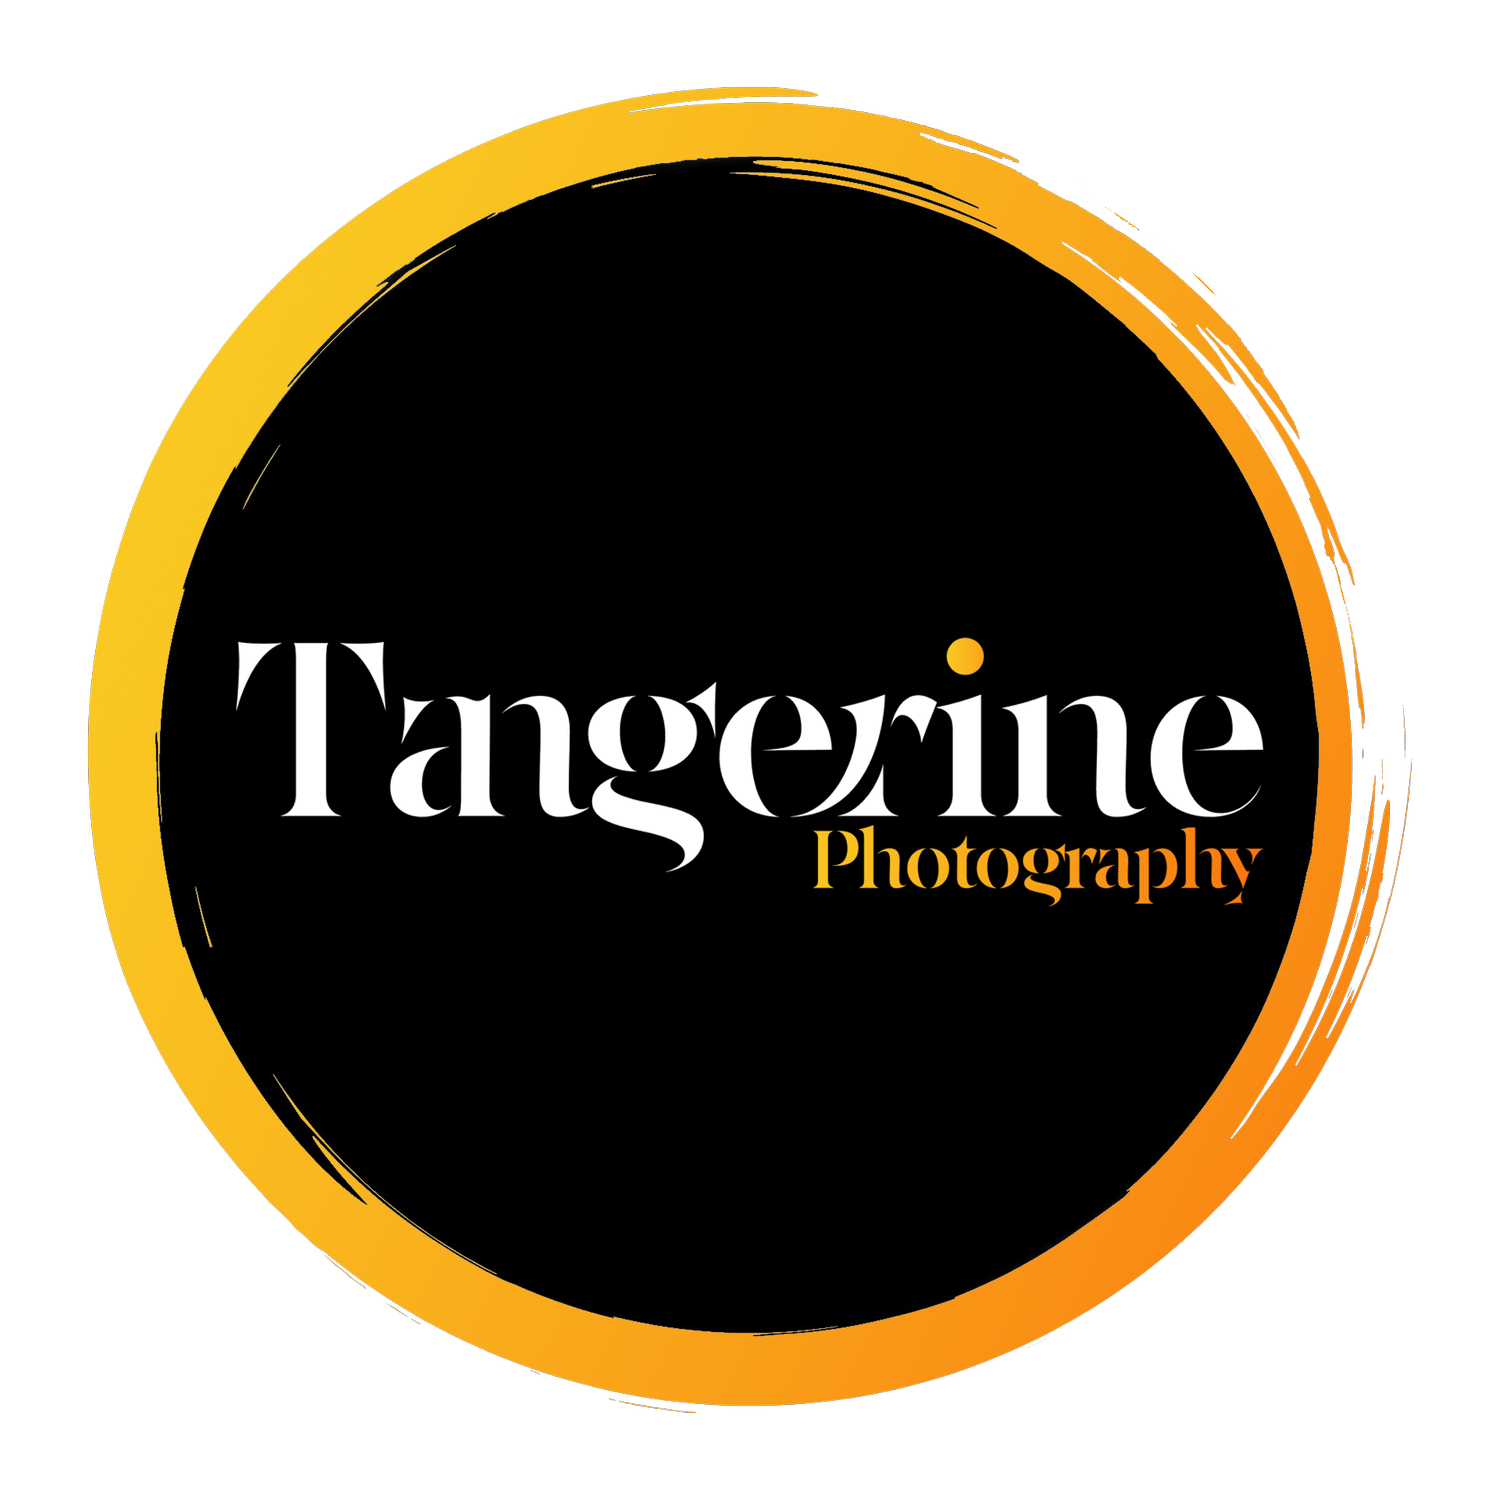 Tangerine Event Photography | Event Photographers in Manchester 